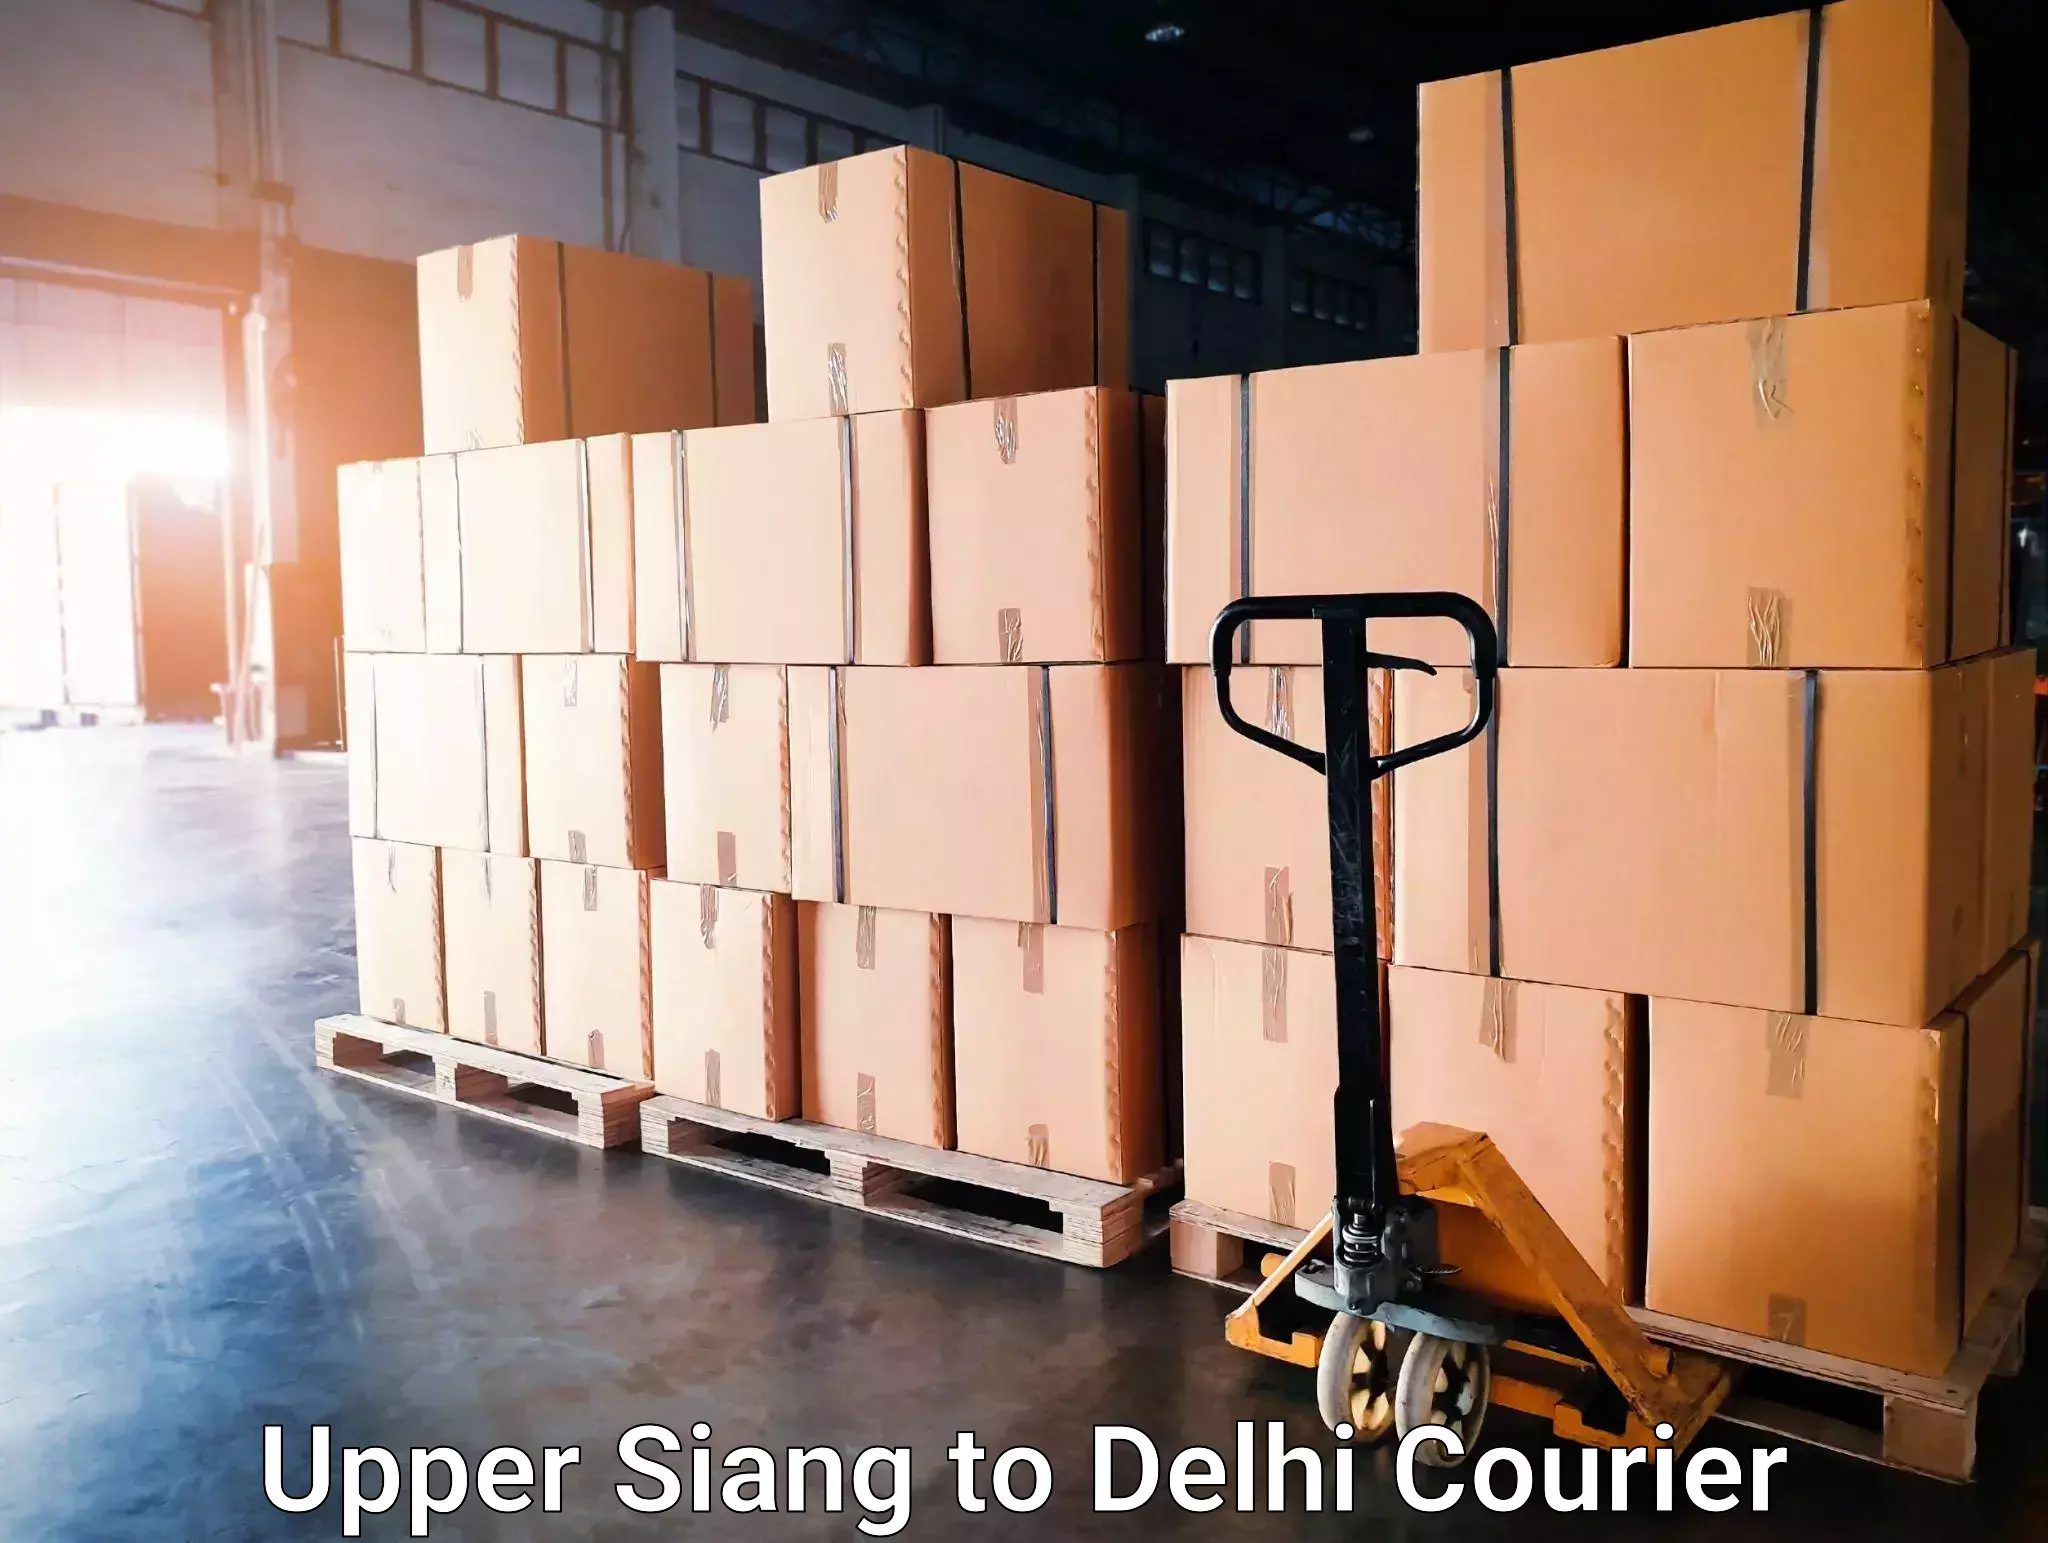 High-speed parcel service Upper Siang to East Delhi